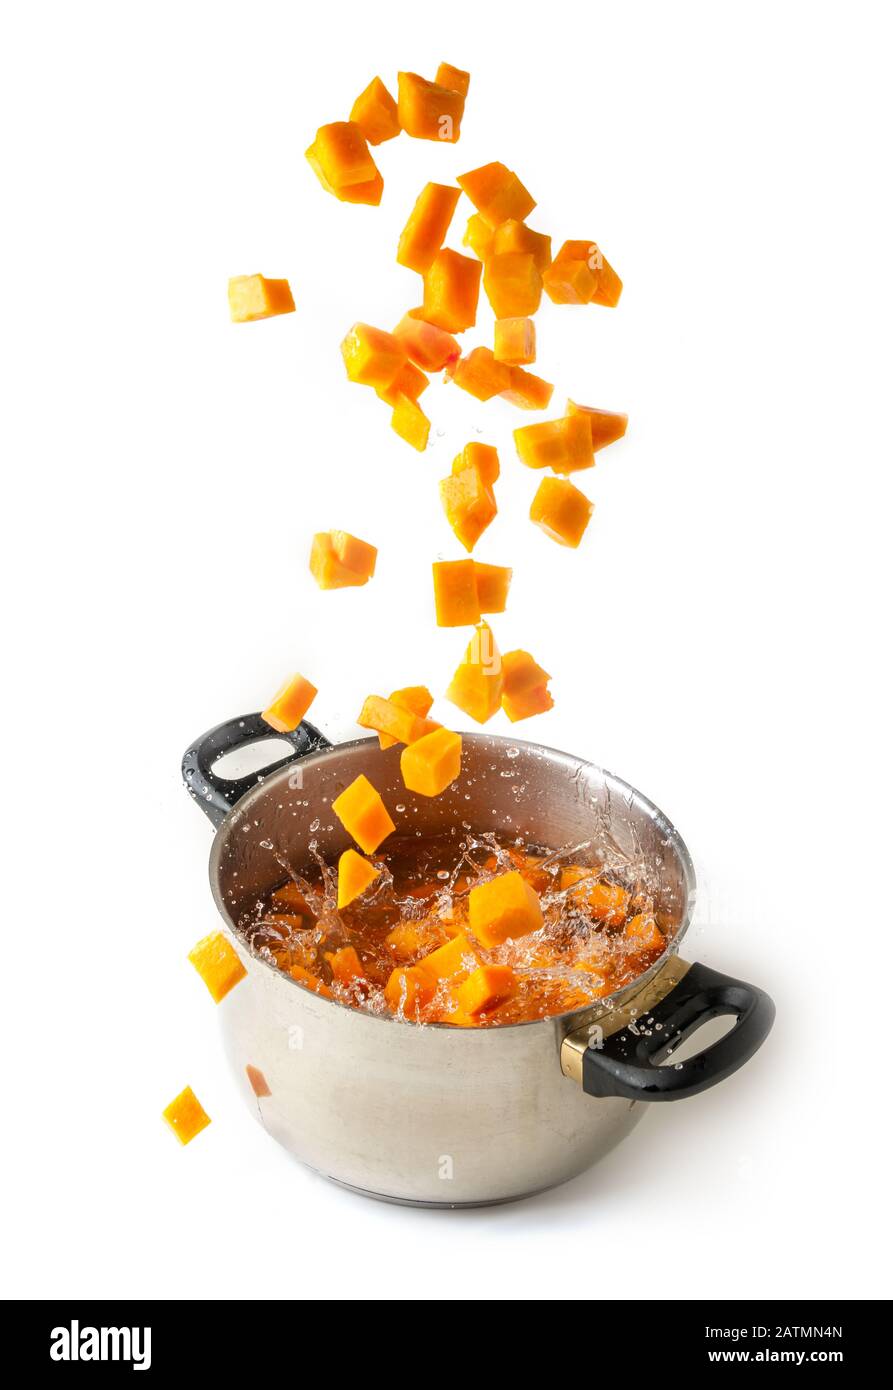 Diced pumpkin falling in a boiling pot, isolated white background Stock Photo